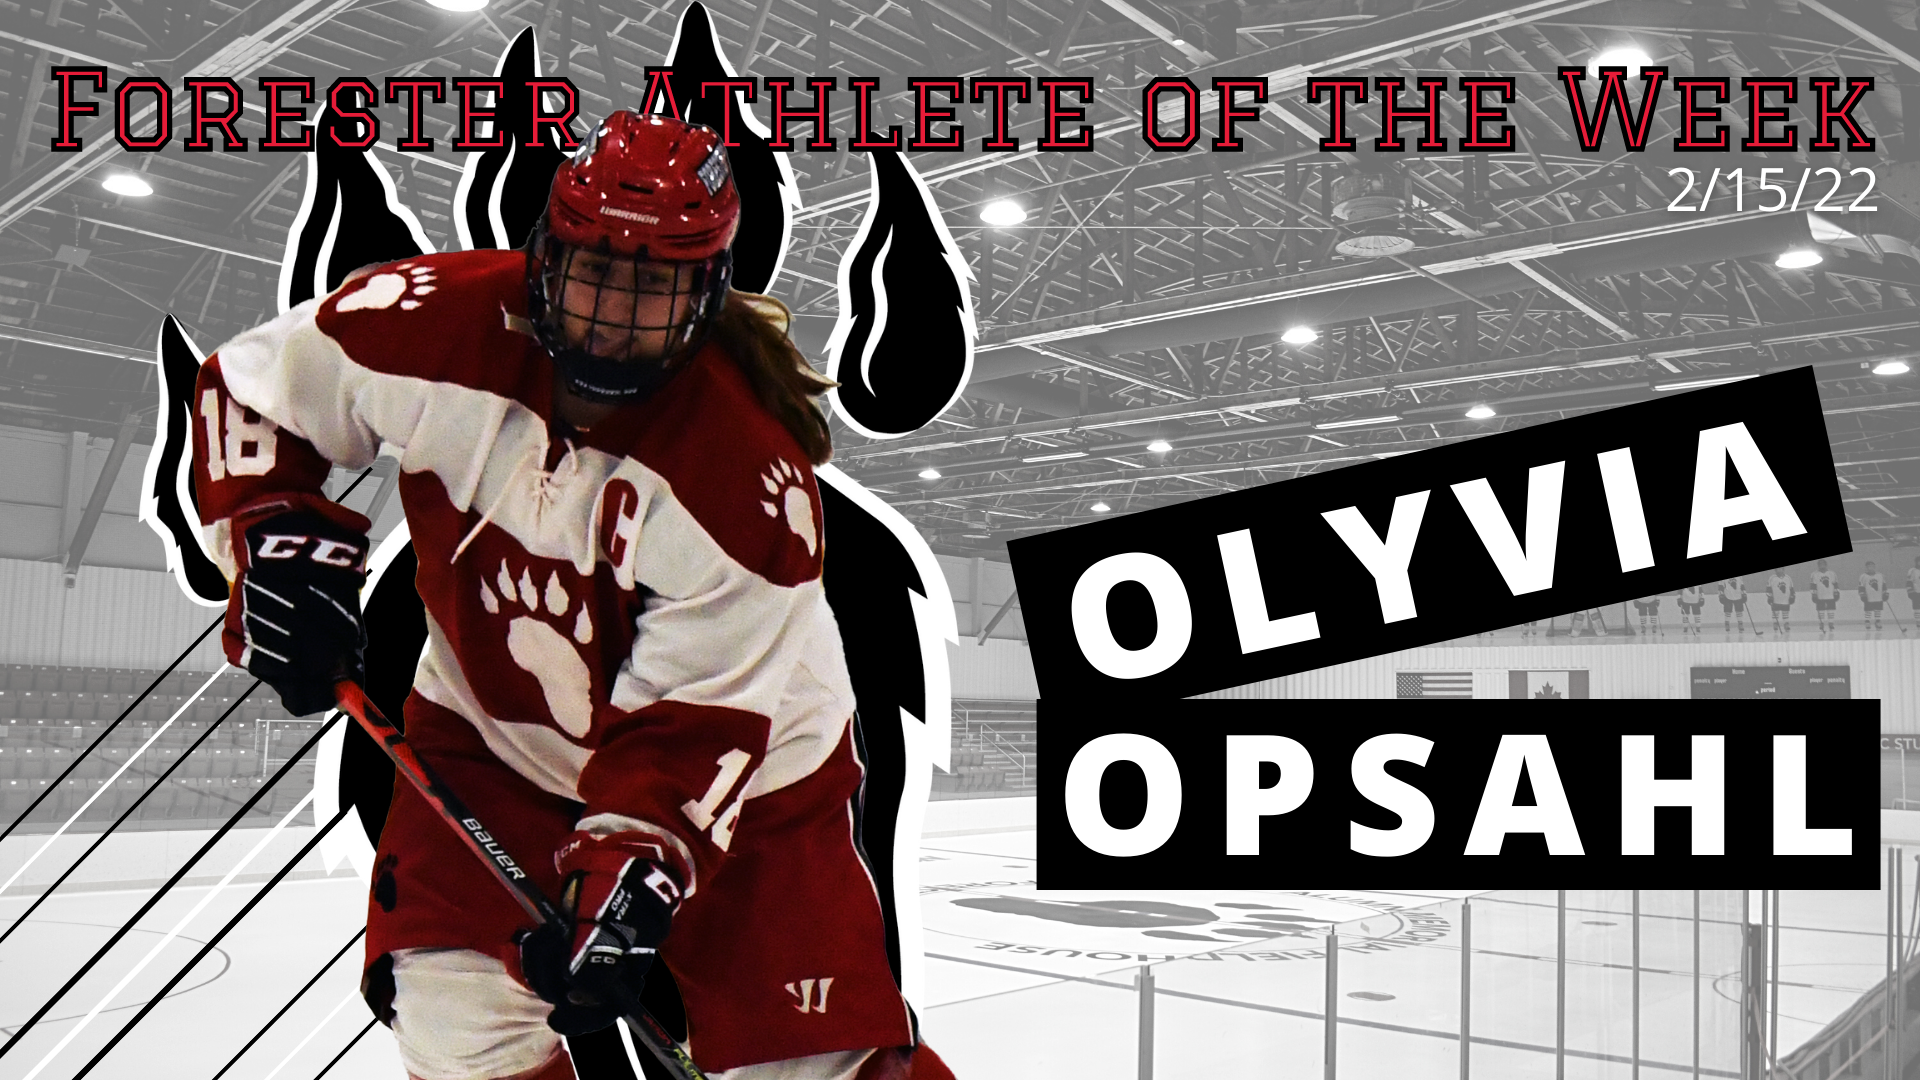 Olyvia Opsahl Named Women's Forester Athlete of the Week